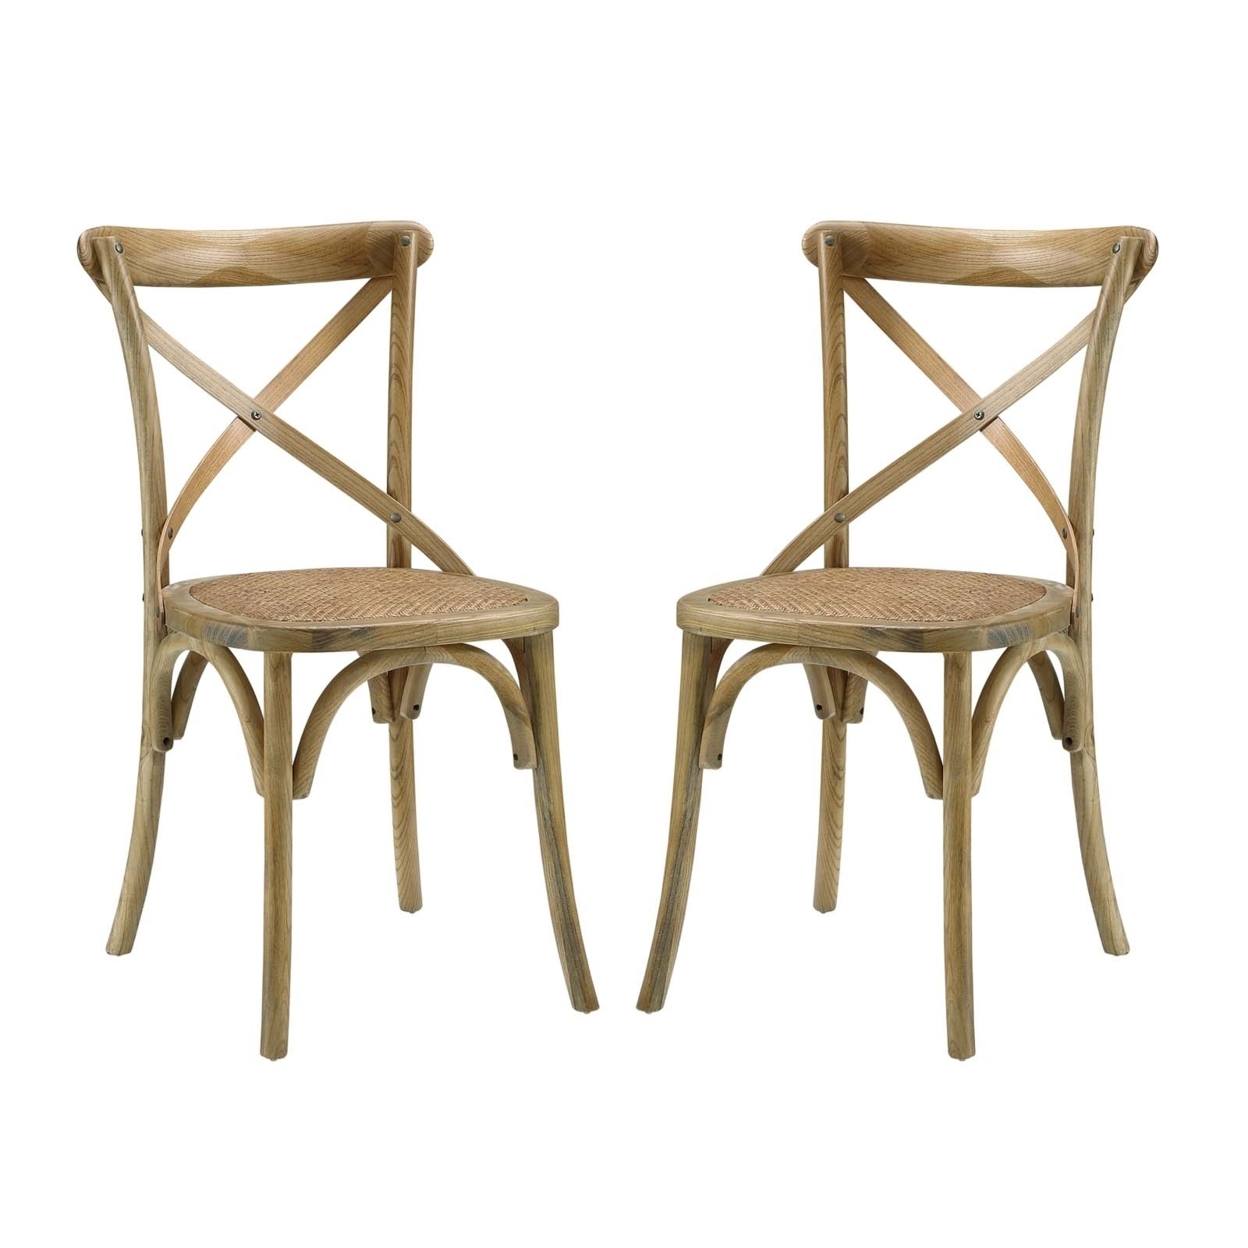 Gear Dining Side Chair Set Of 2,Natural